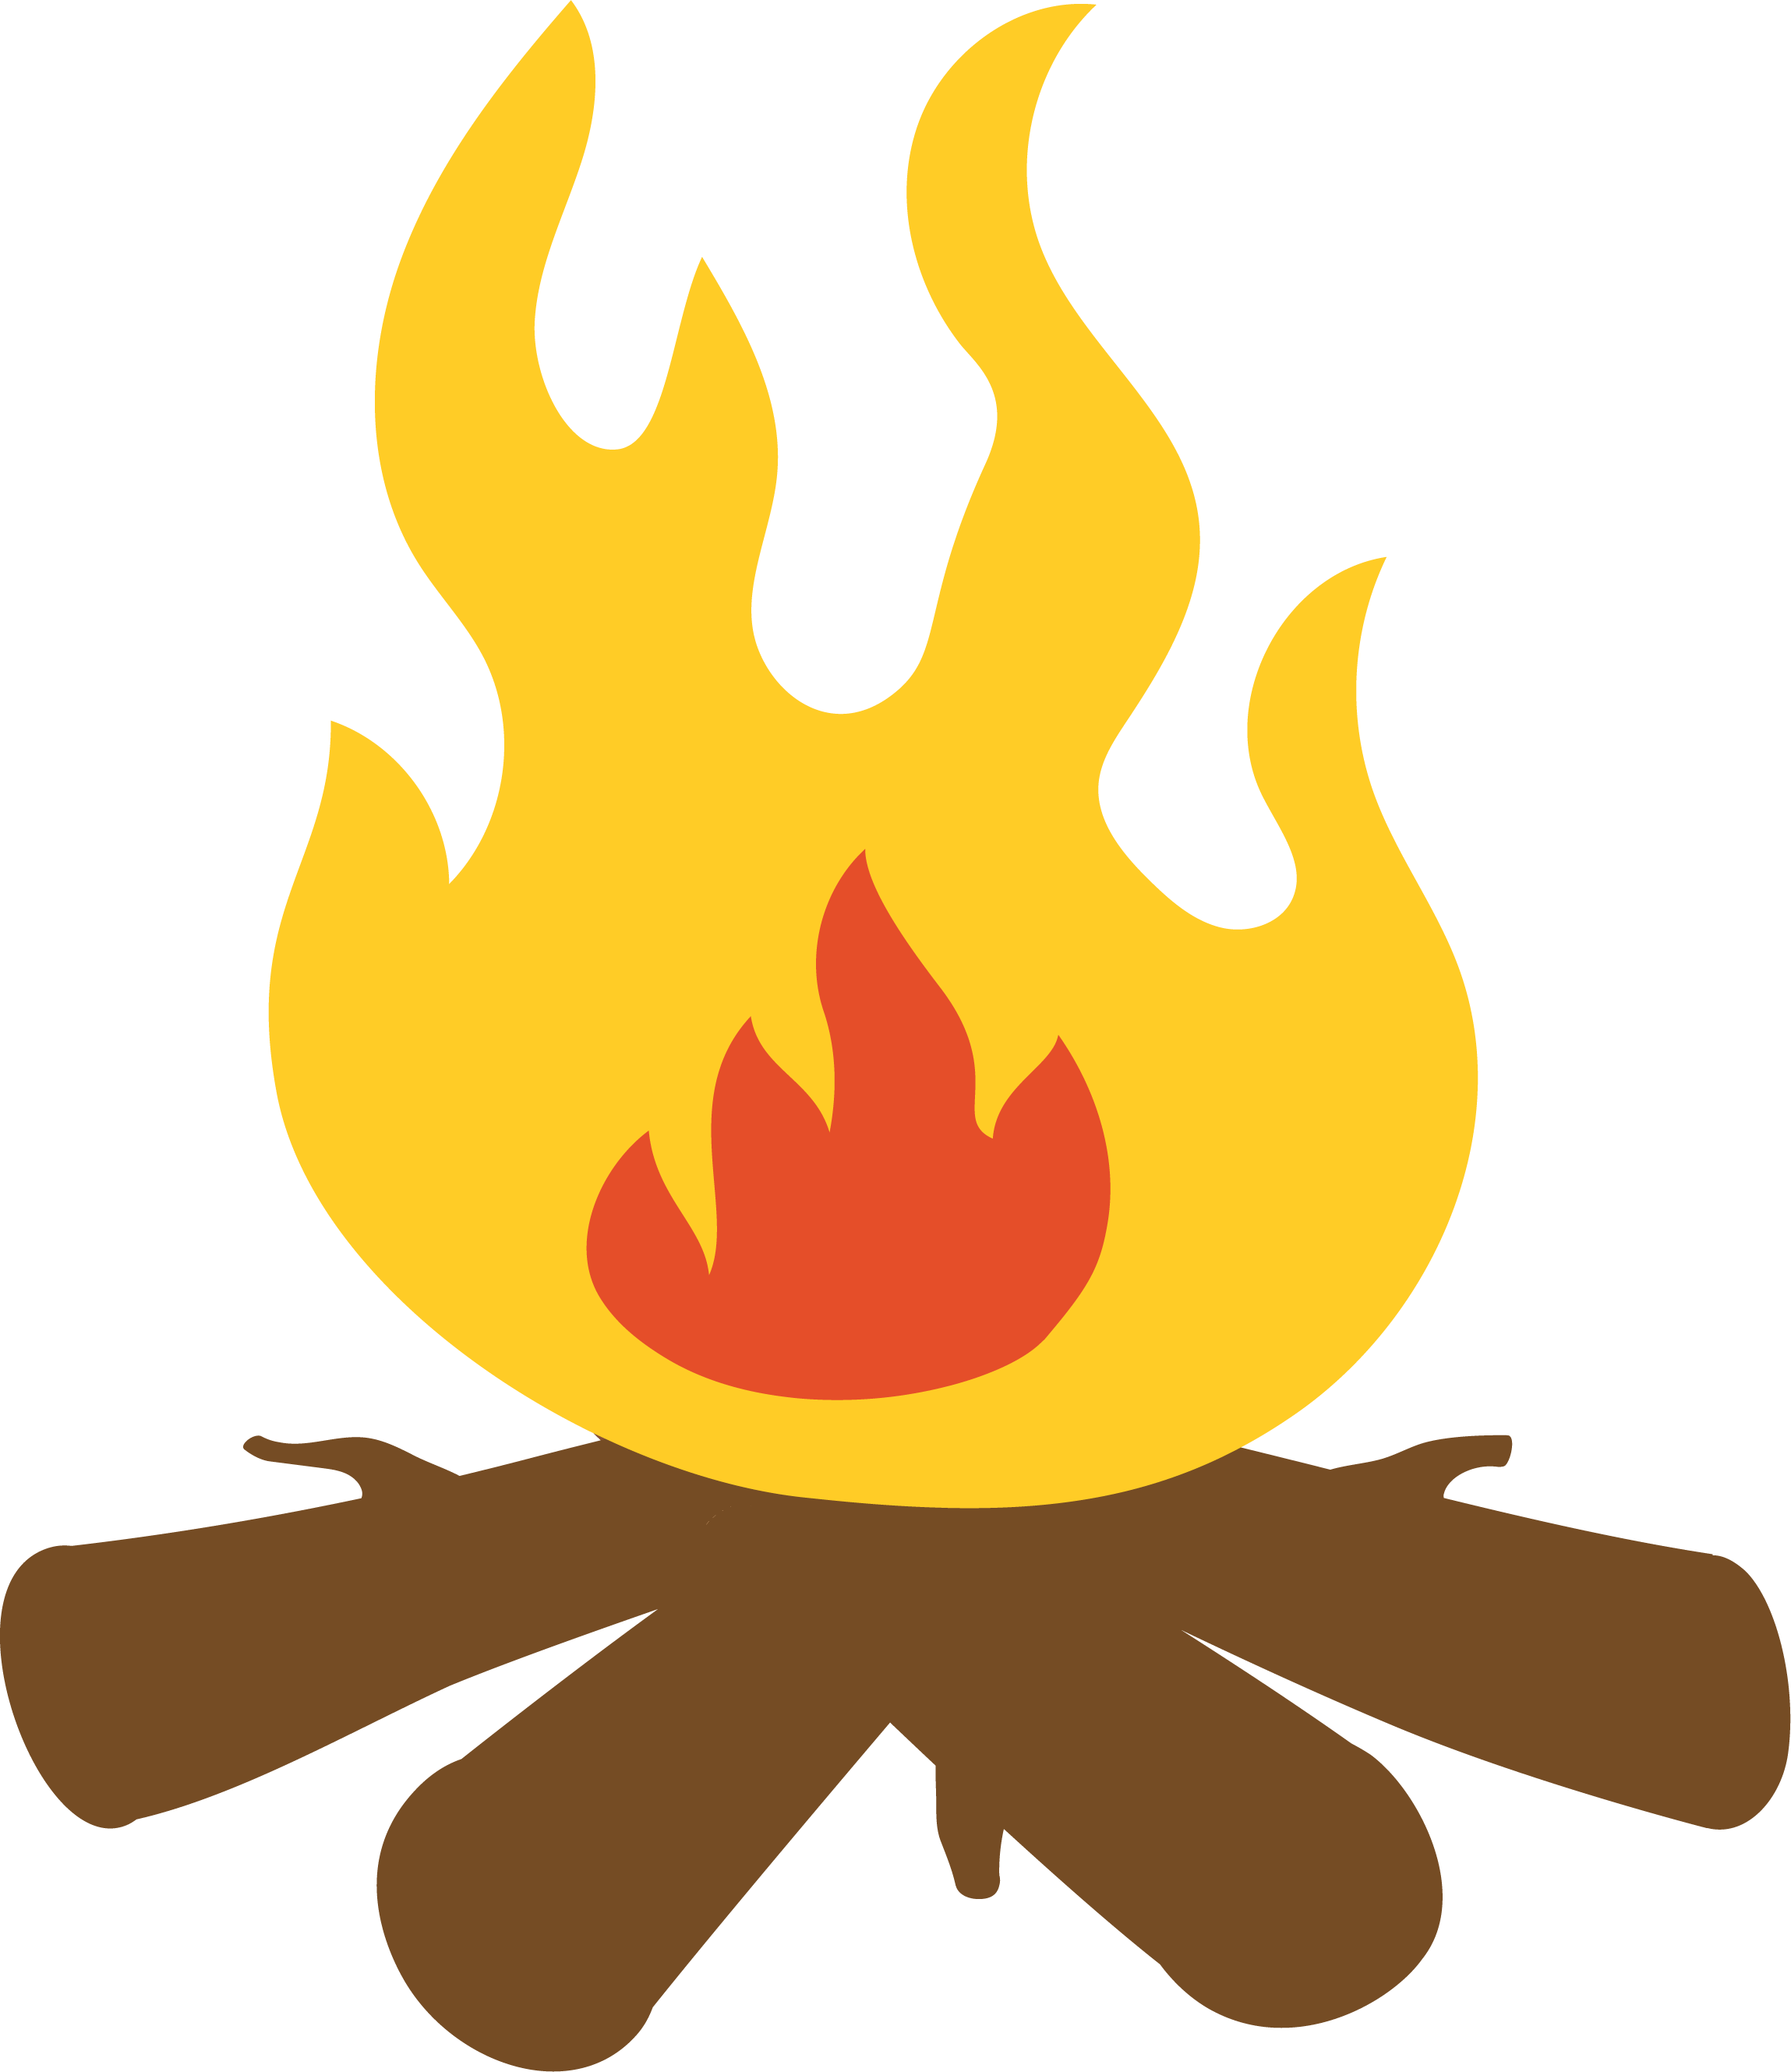 A Fire With Flames On A Black Background